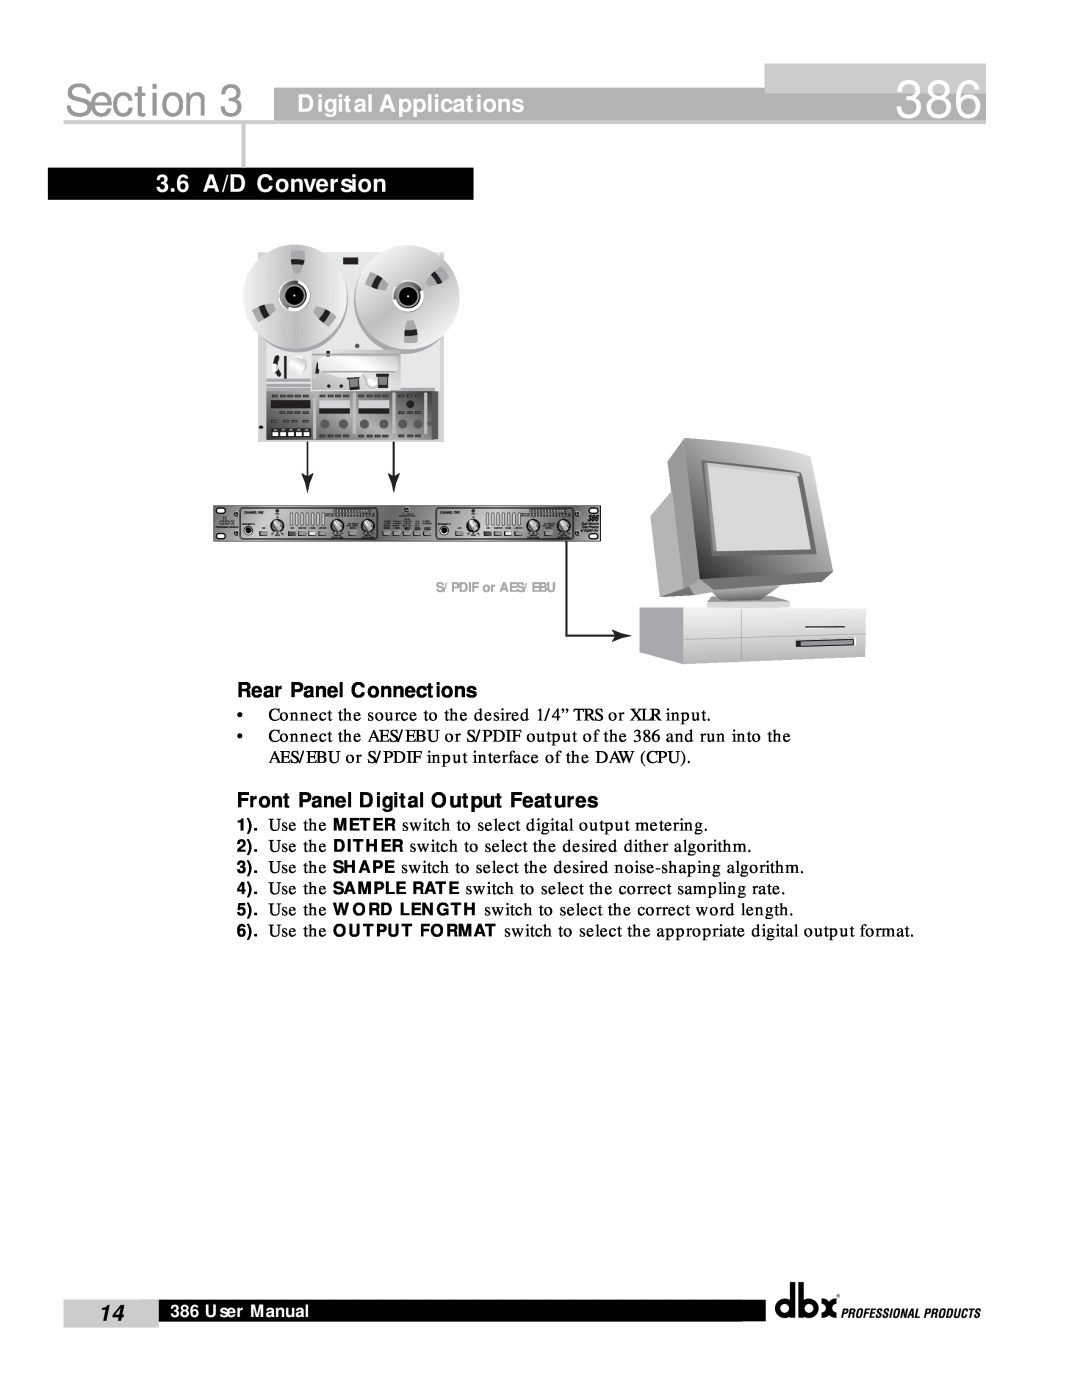 dbx Pro 386 Digital Applications 3.6 A/D Conversion, Section, Rear Panel Connections, Front Panel Digital Output Features 